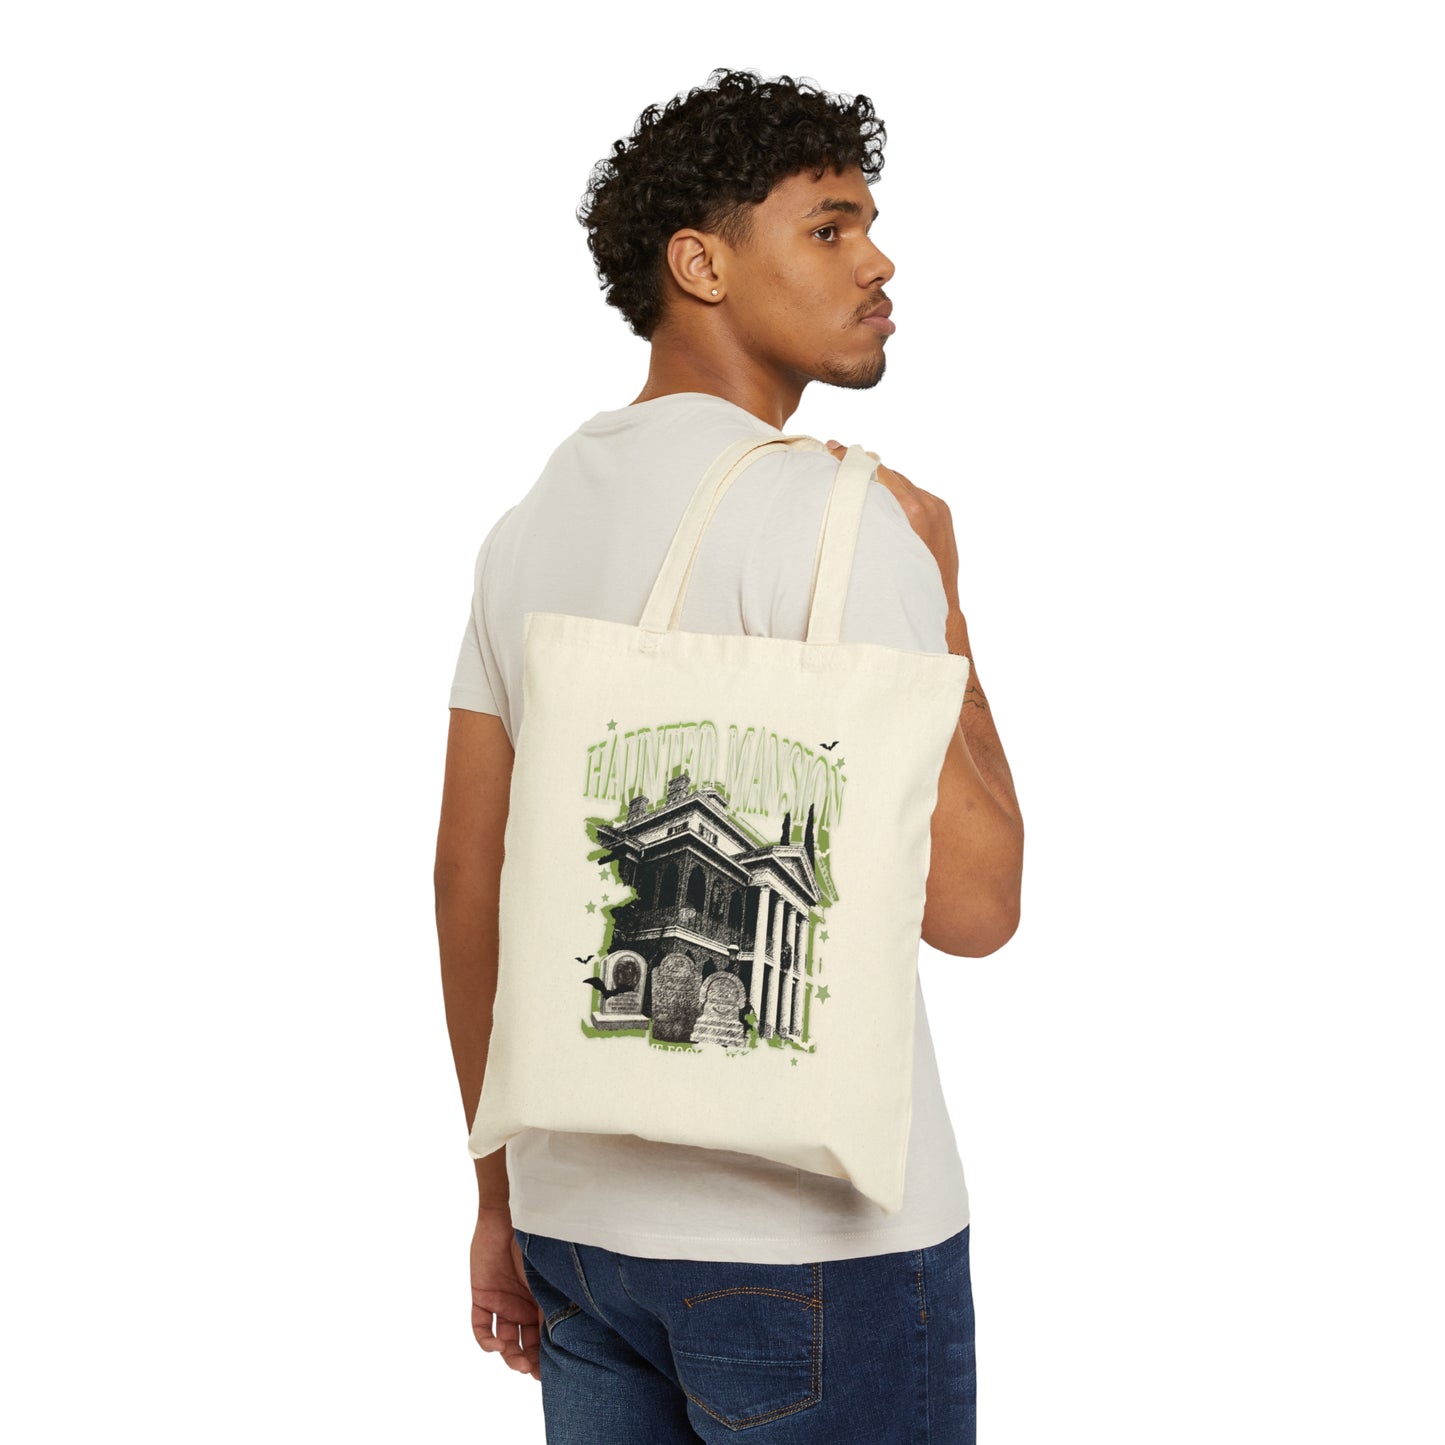 Haunted Mansion Tote